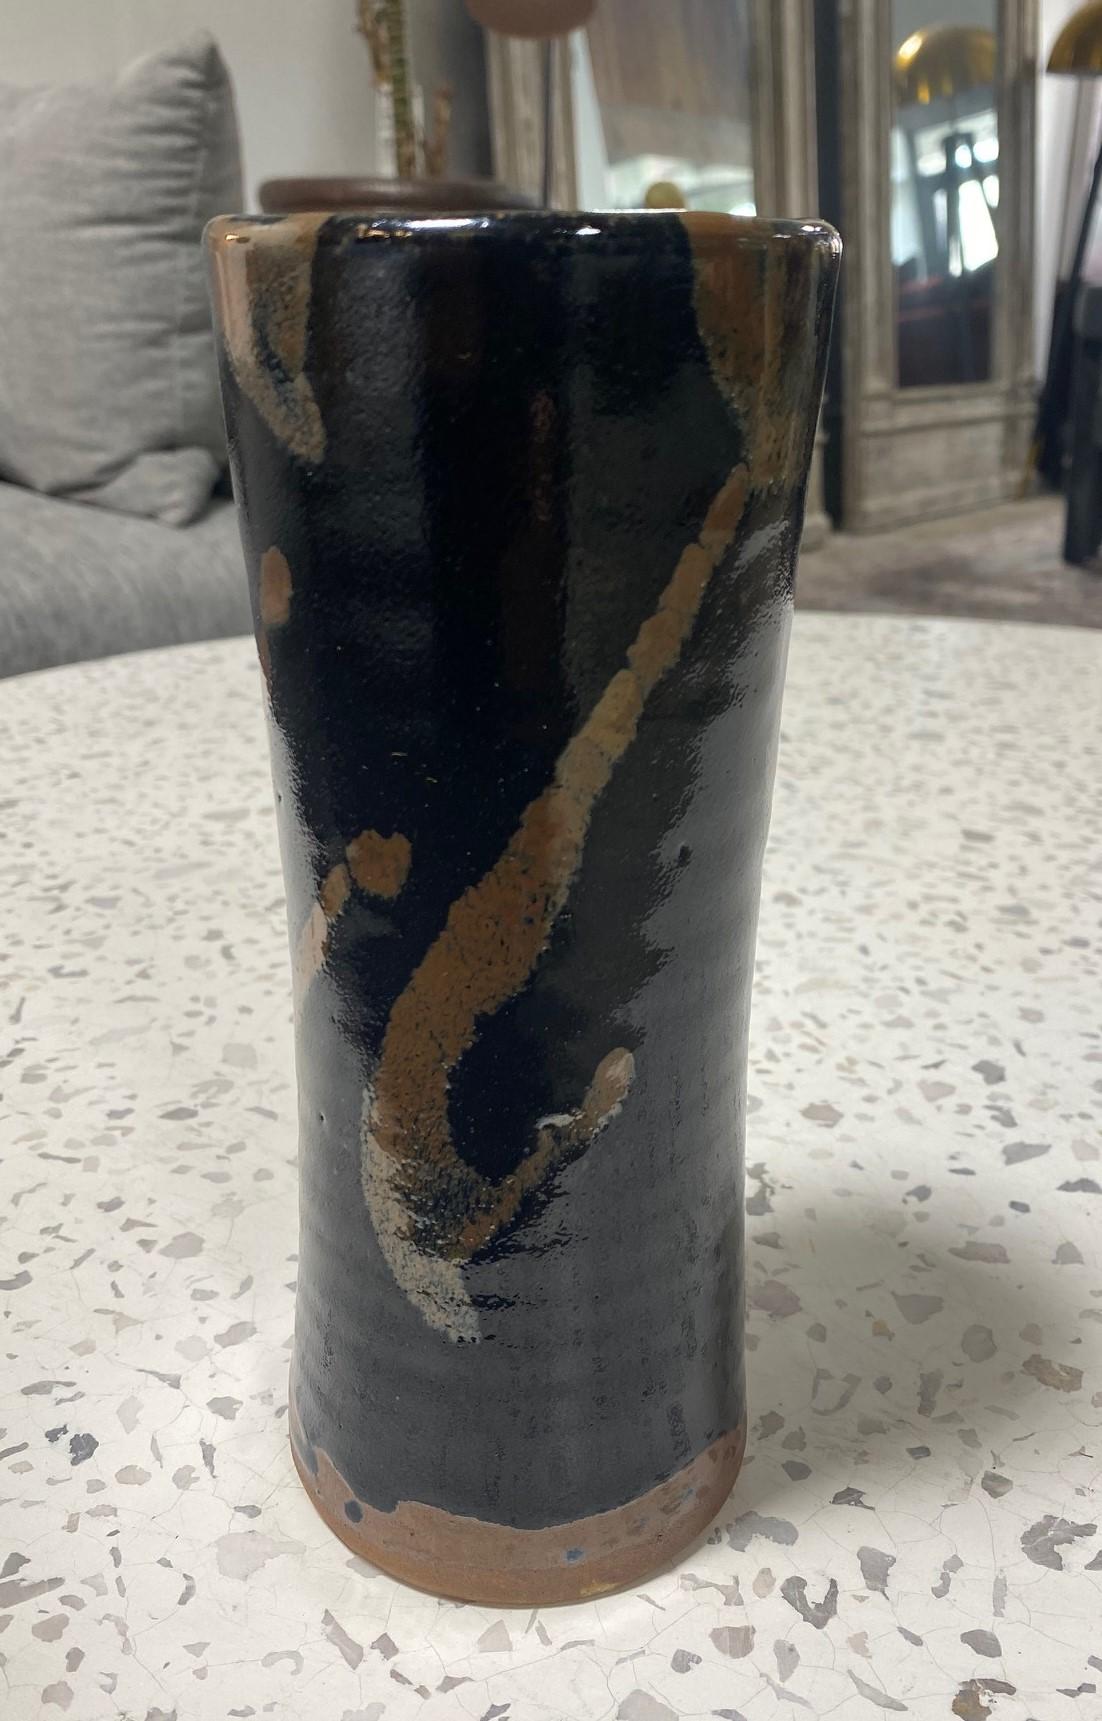 An exquisite, beautifully crafted Japanese pottery vase by master potter Shoji Hamada featuring Hamada's famous signature tenmoku glaze with kaki trailing. The original Hamada signed and sealed wood storage box is included as well as the written